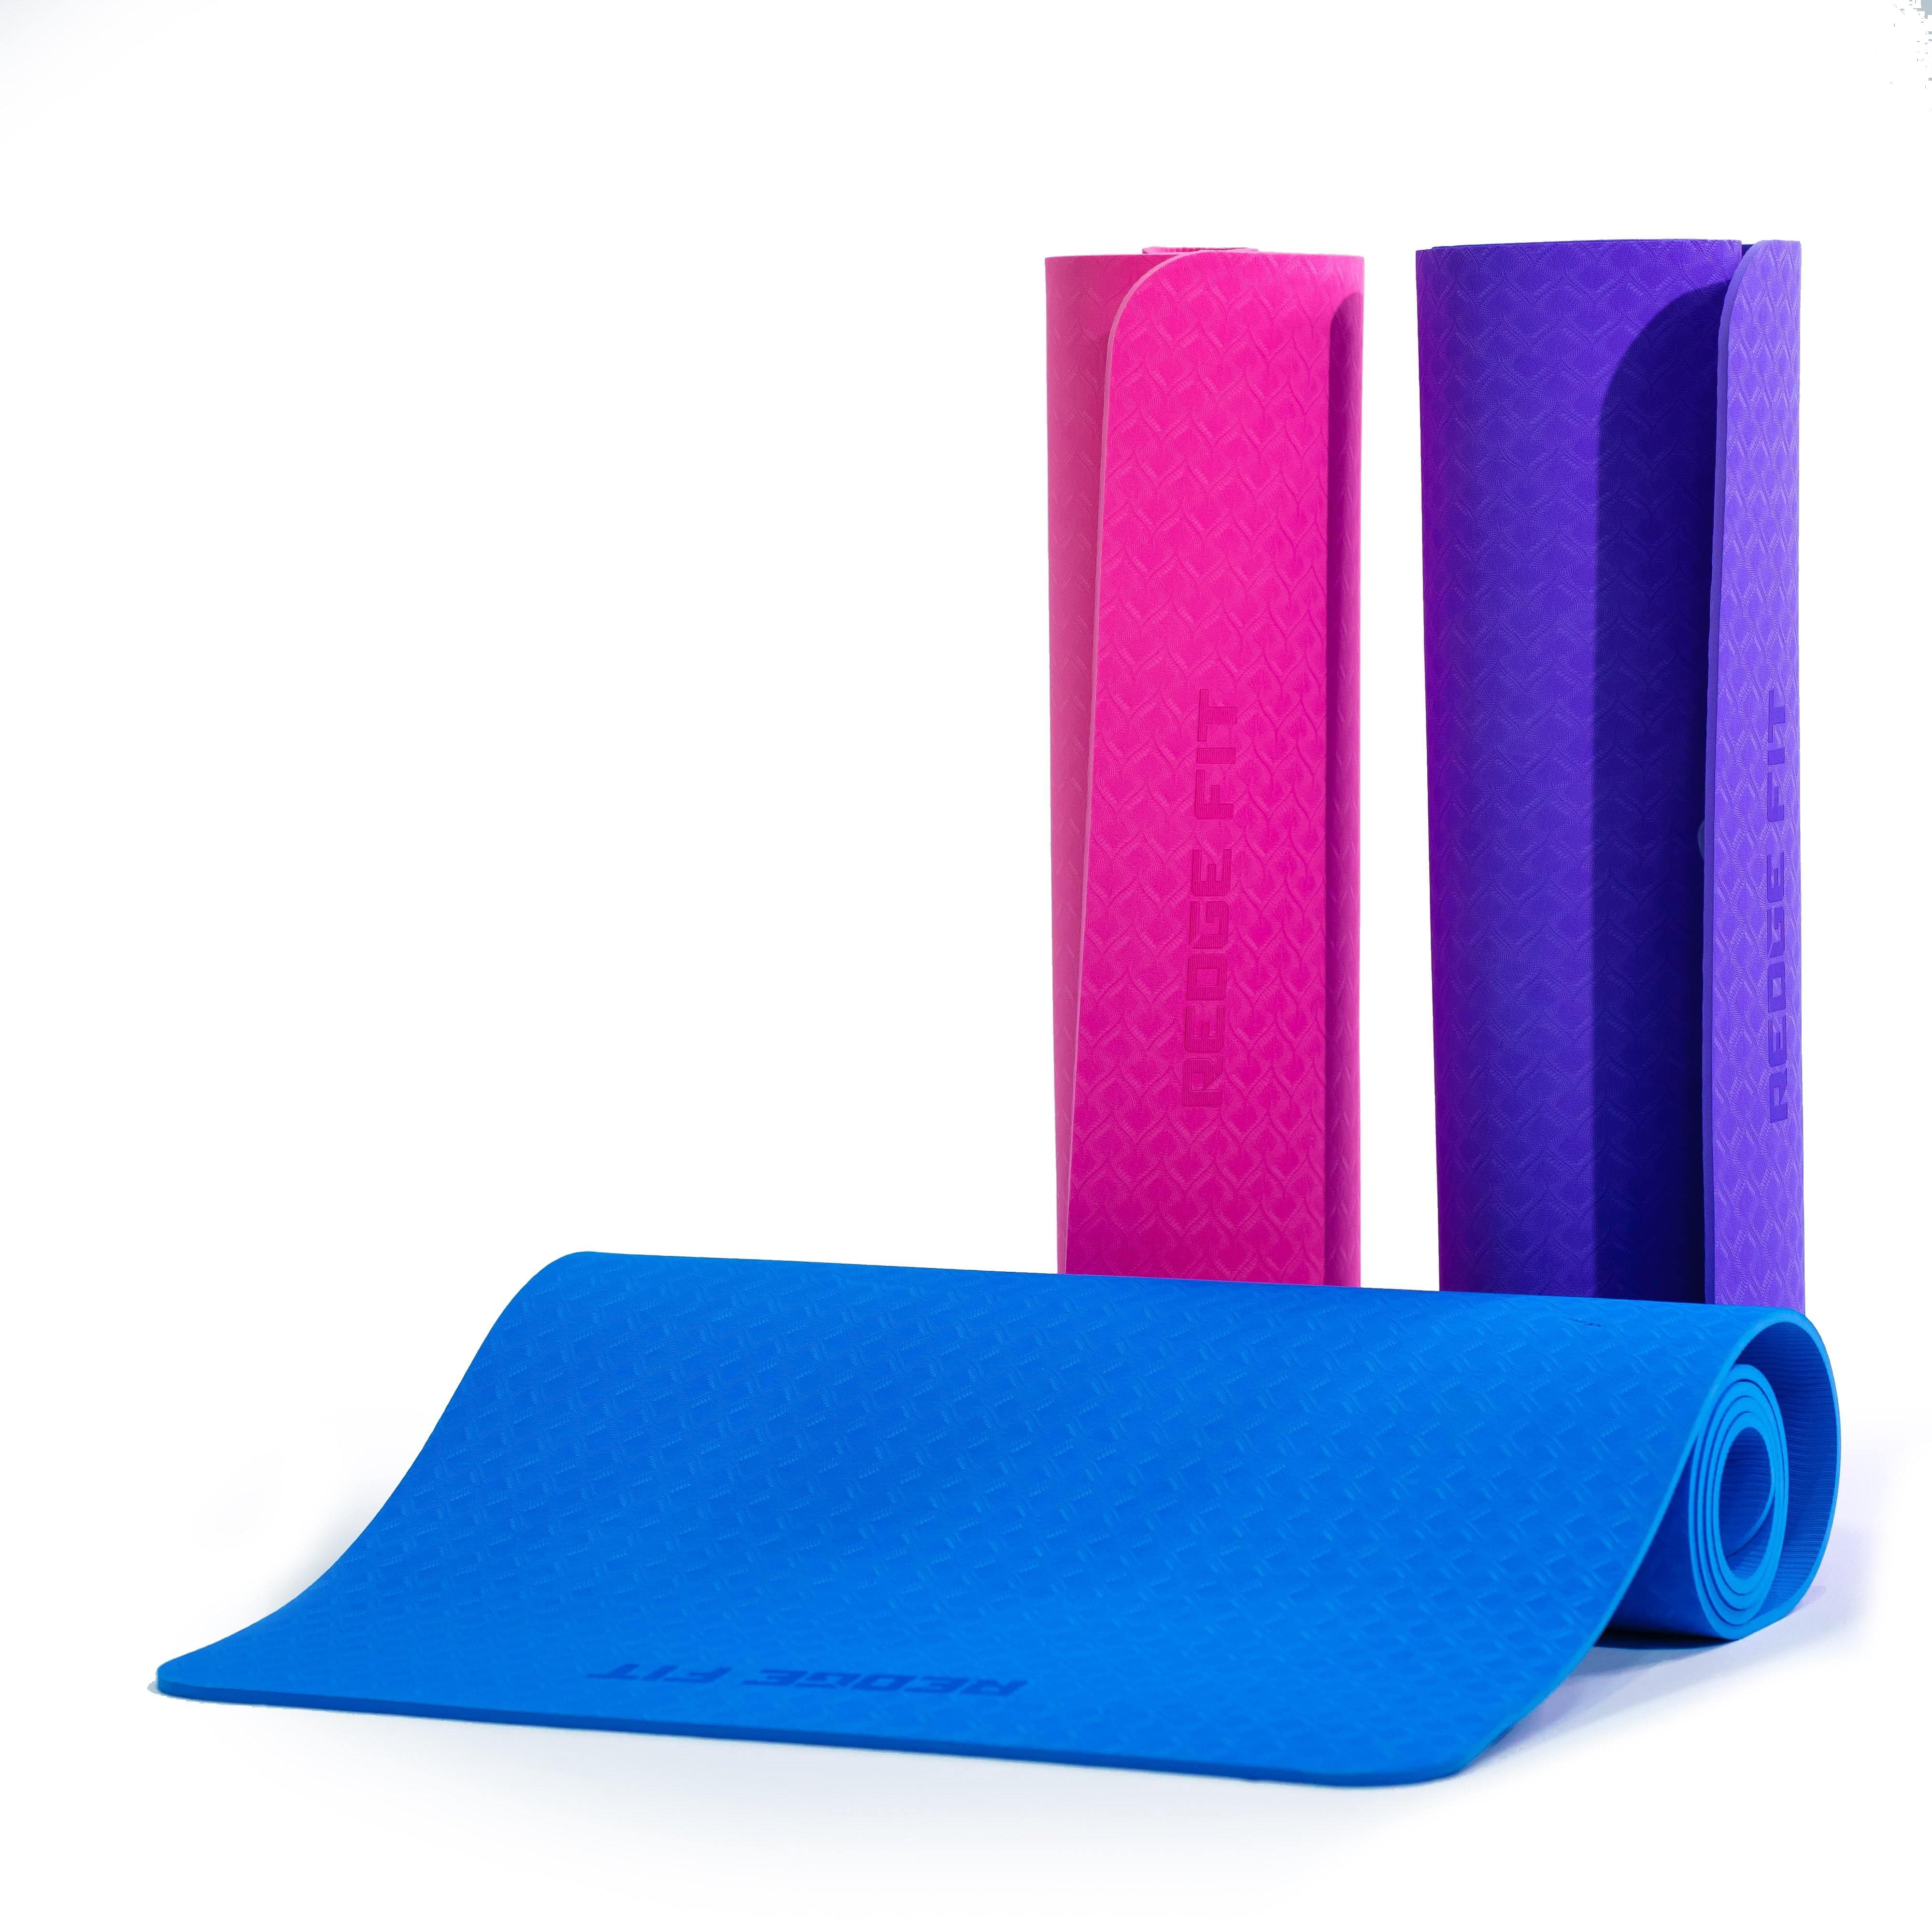 The Redge Fit Workout Mat Available at https://www.getredge.com/products/redge-workout-mat